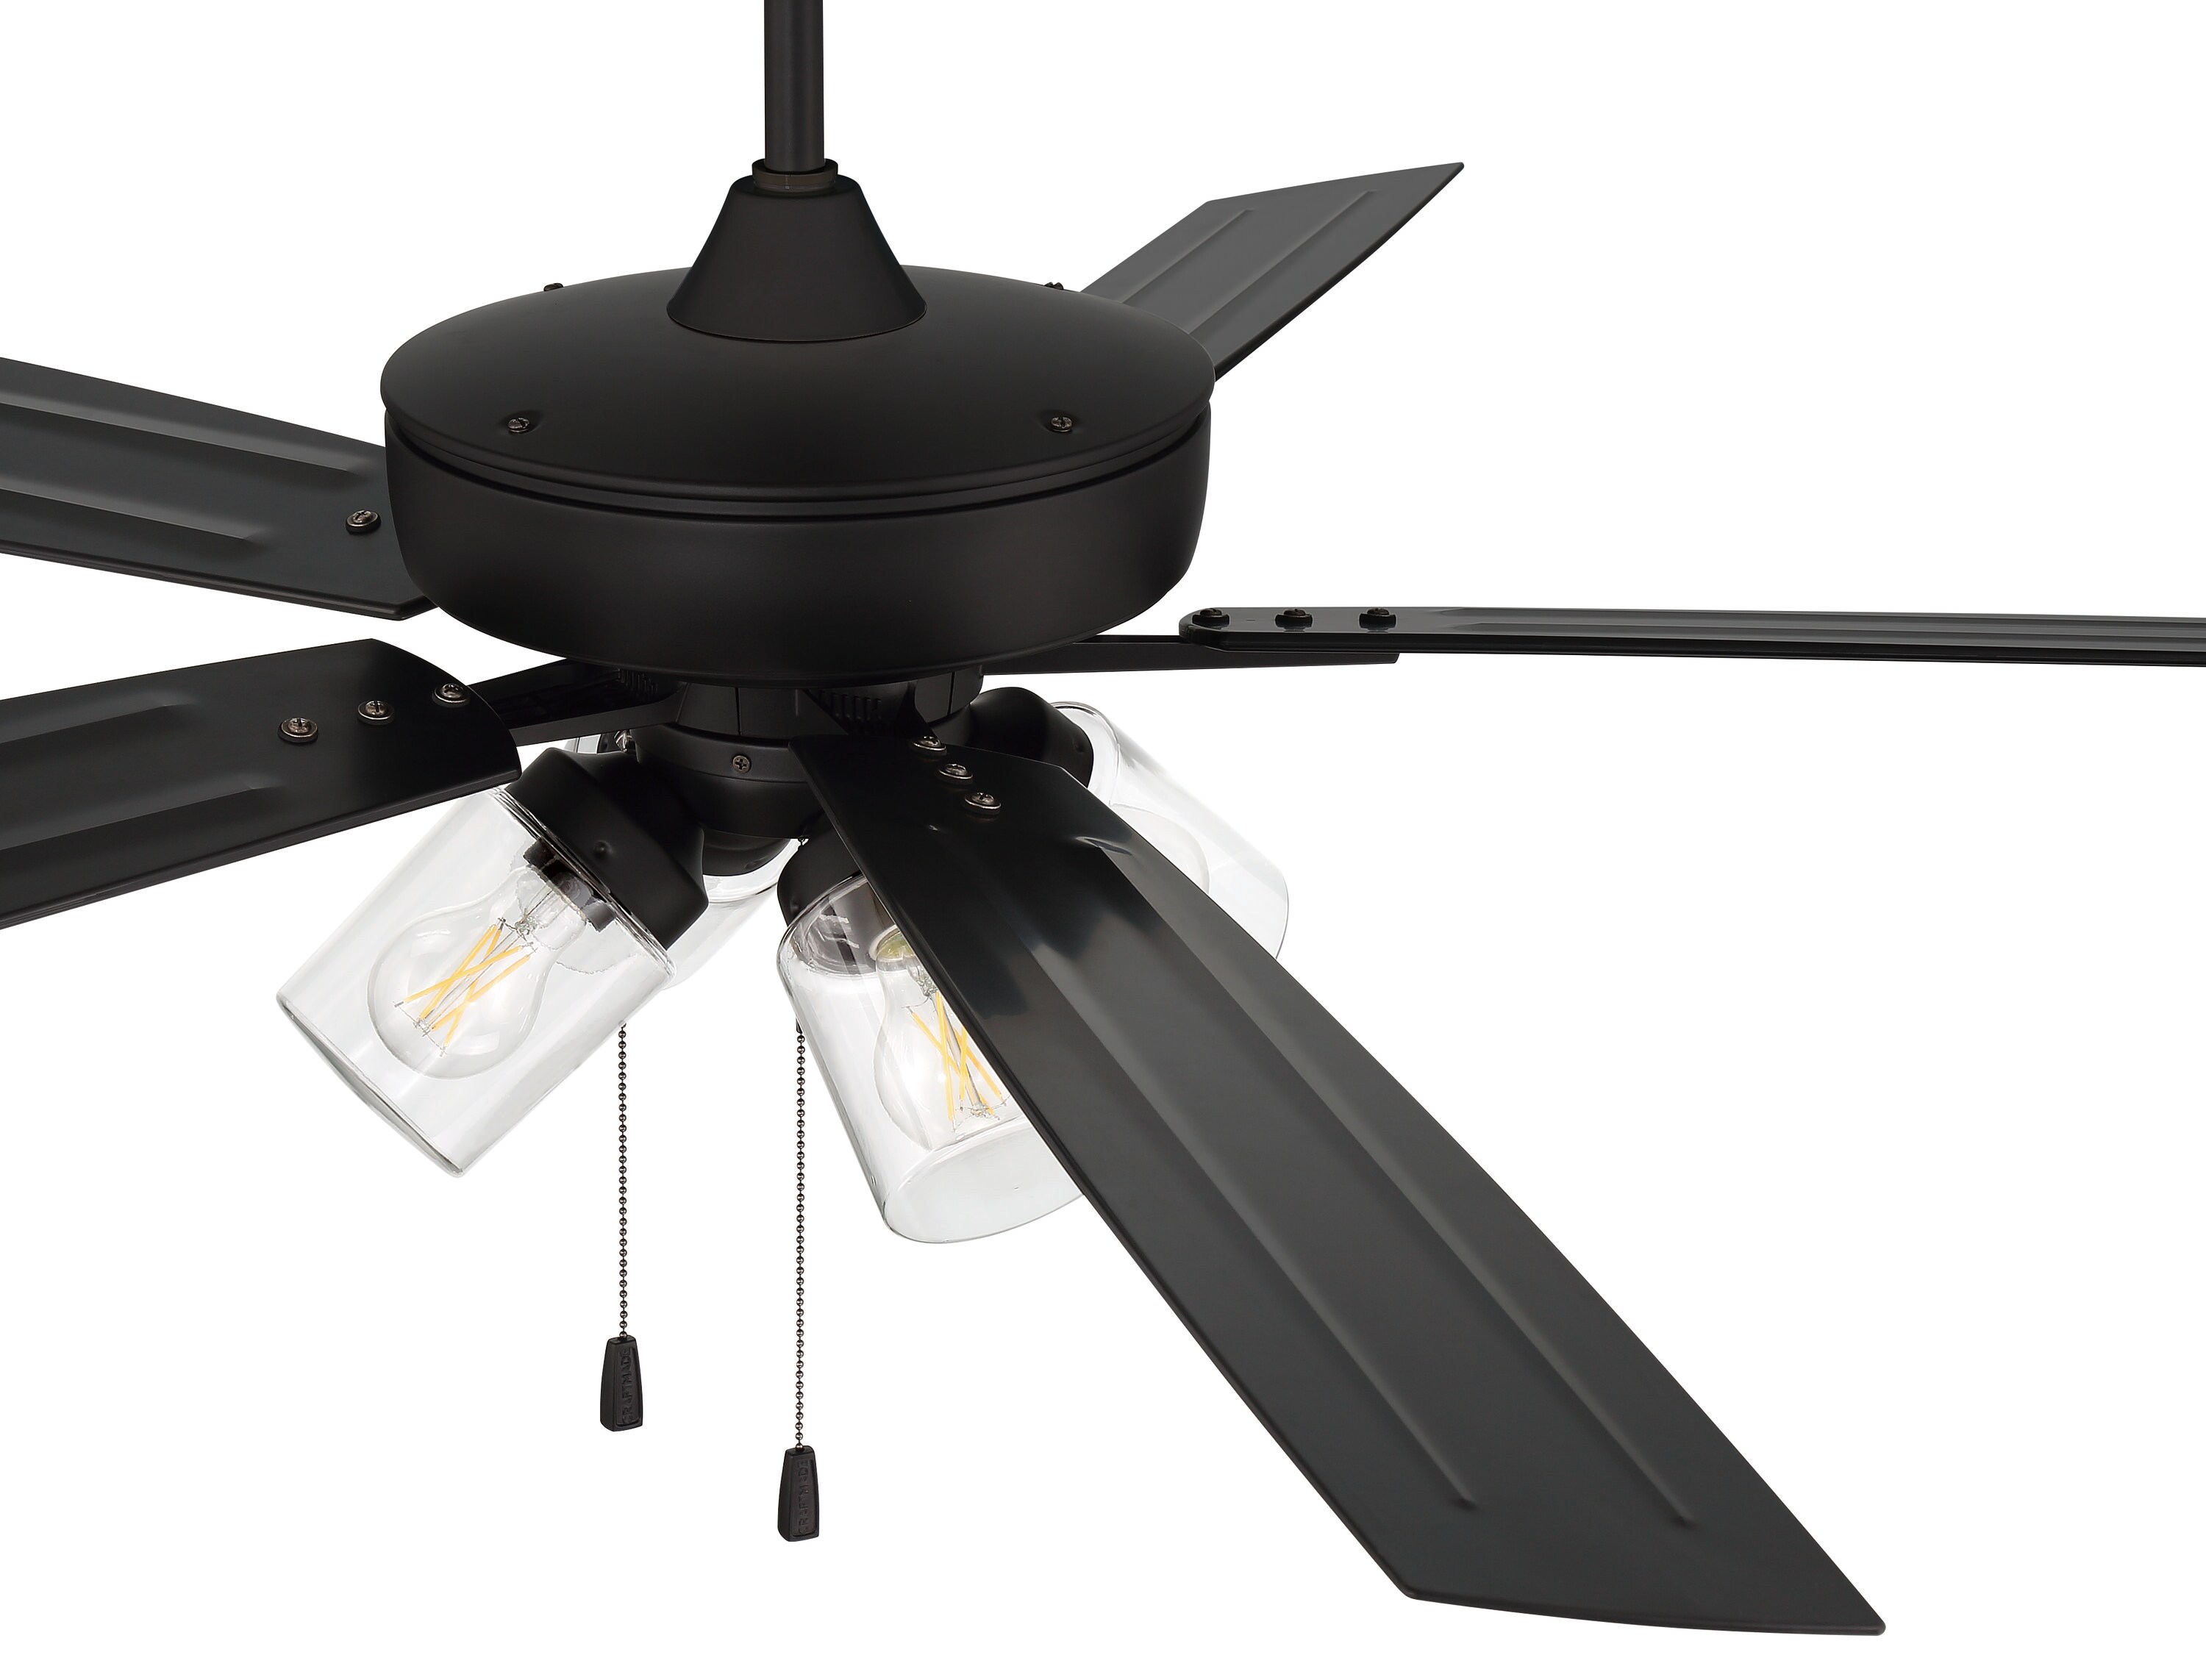 Craftmade Super Pro 104 Clear 4 Light Kit 60-in Flat Black Indoor Downrod  or Flush Mount Ceiling Fan with Light (5-Blade)